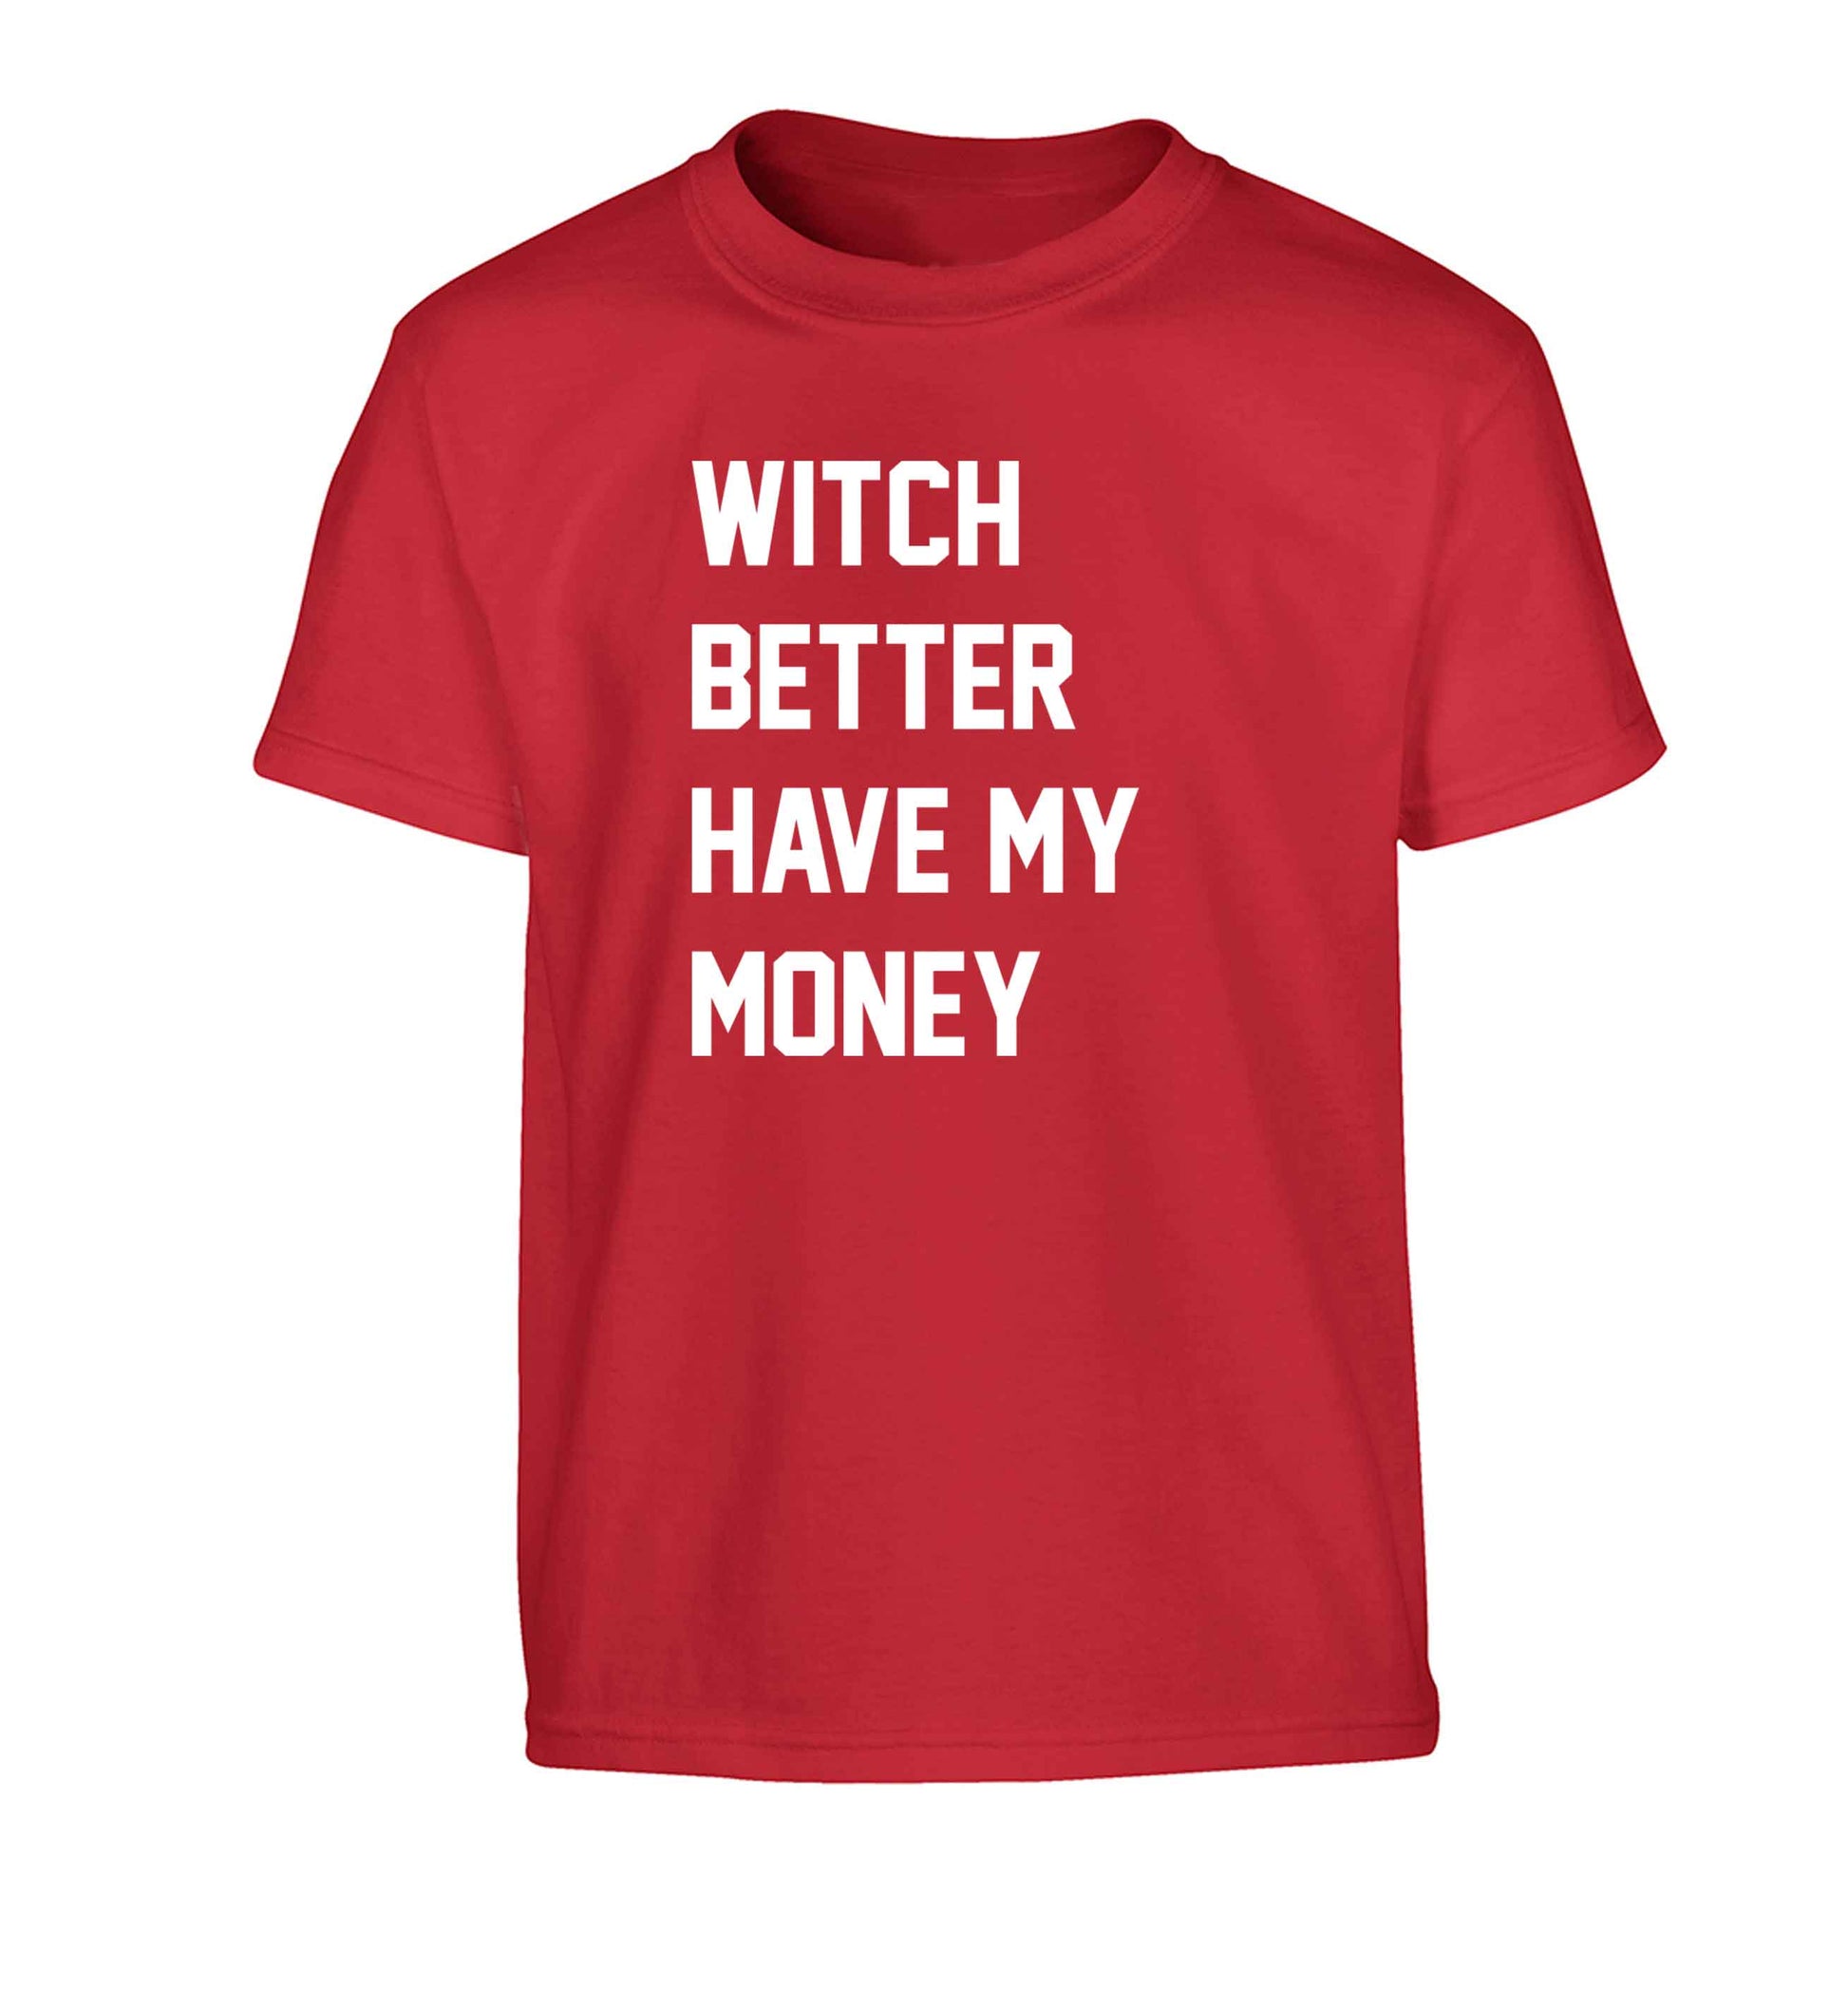 Witch better have my money Children's red Tshirt 12-13 Years